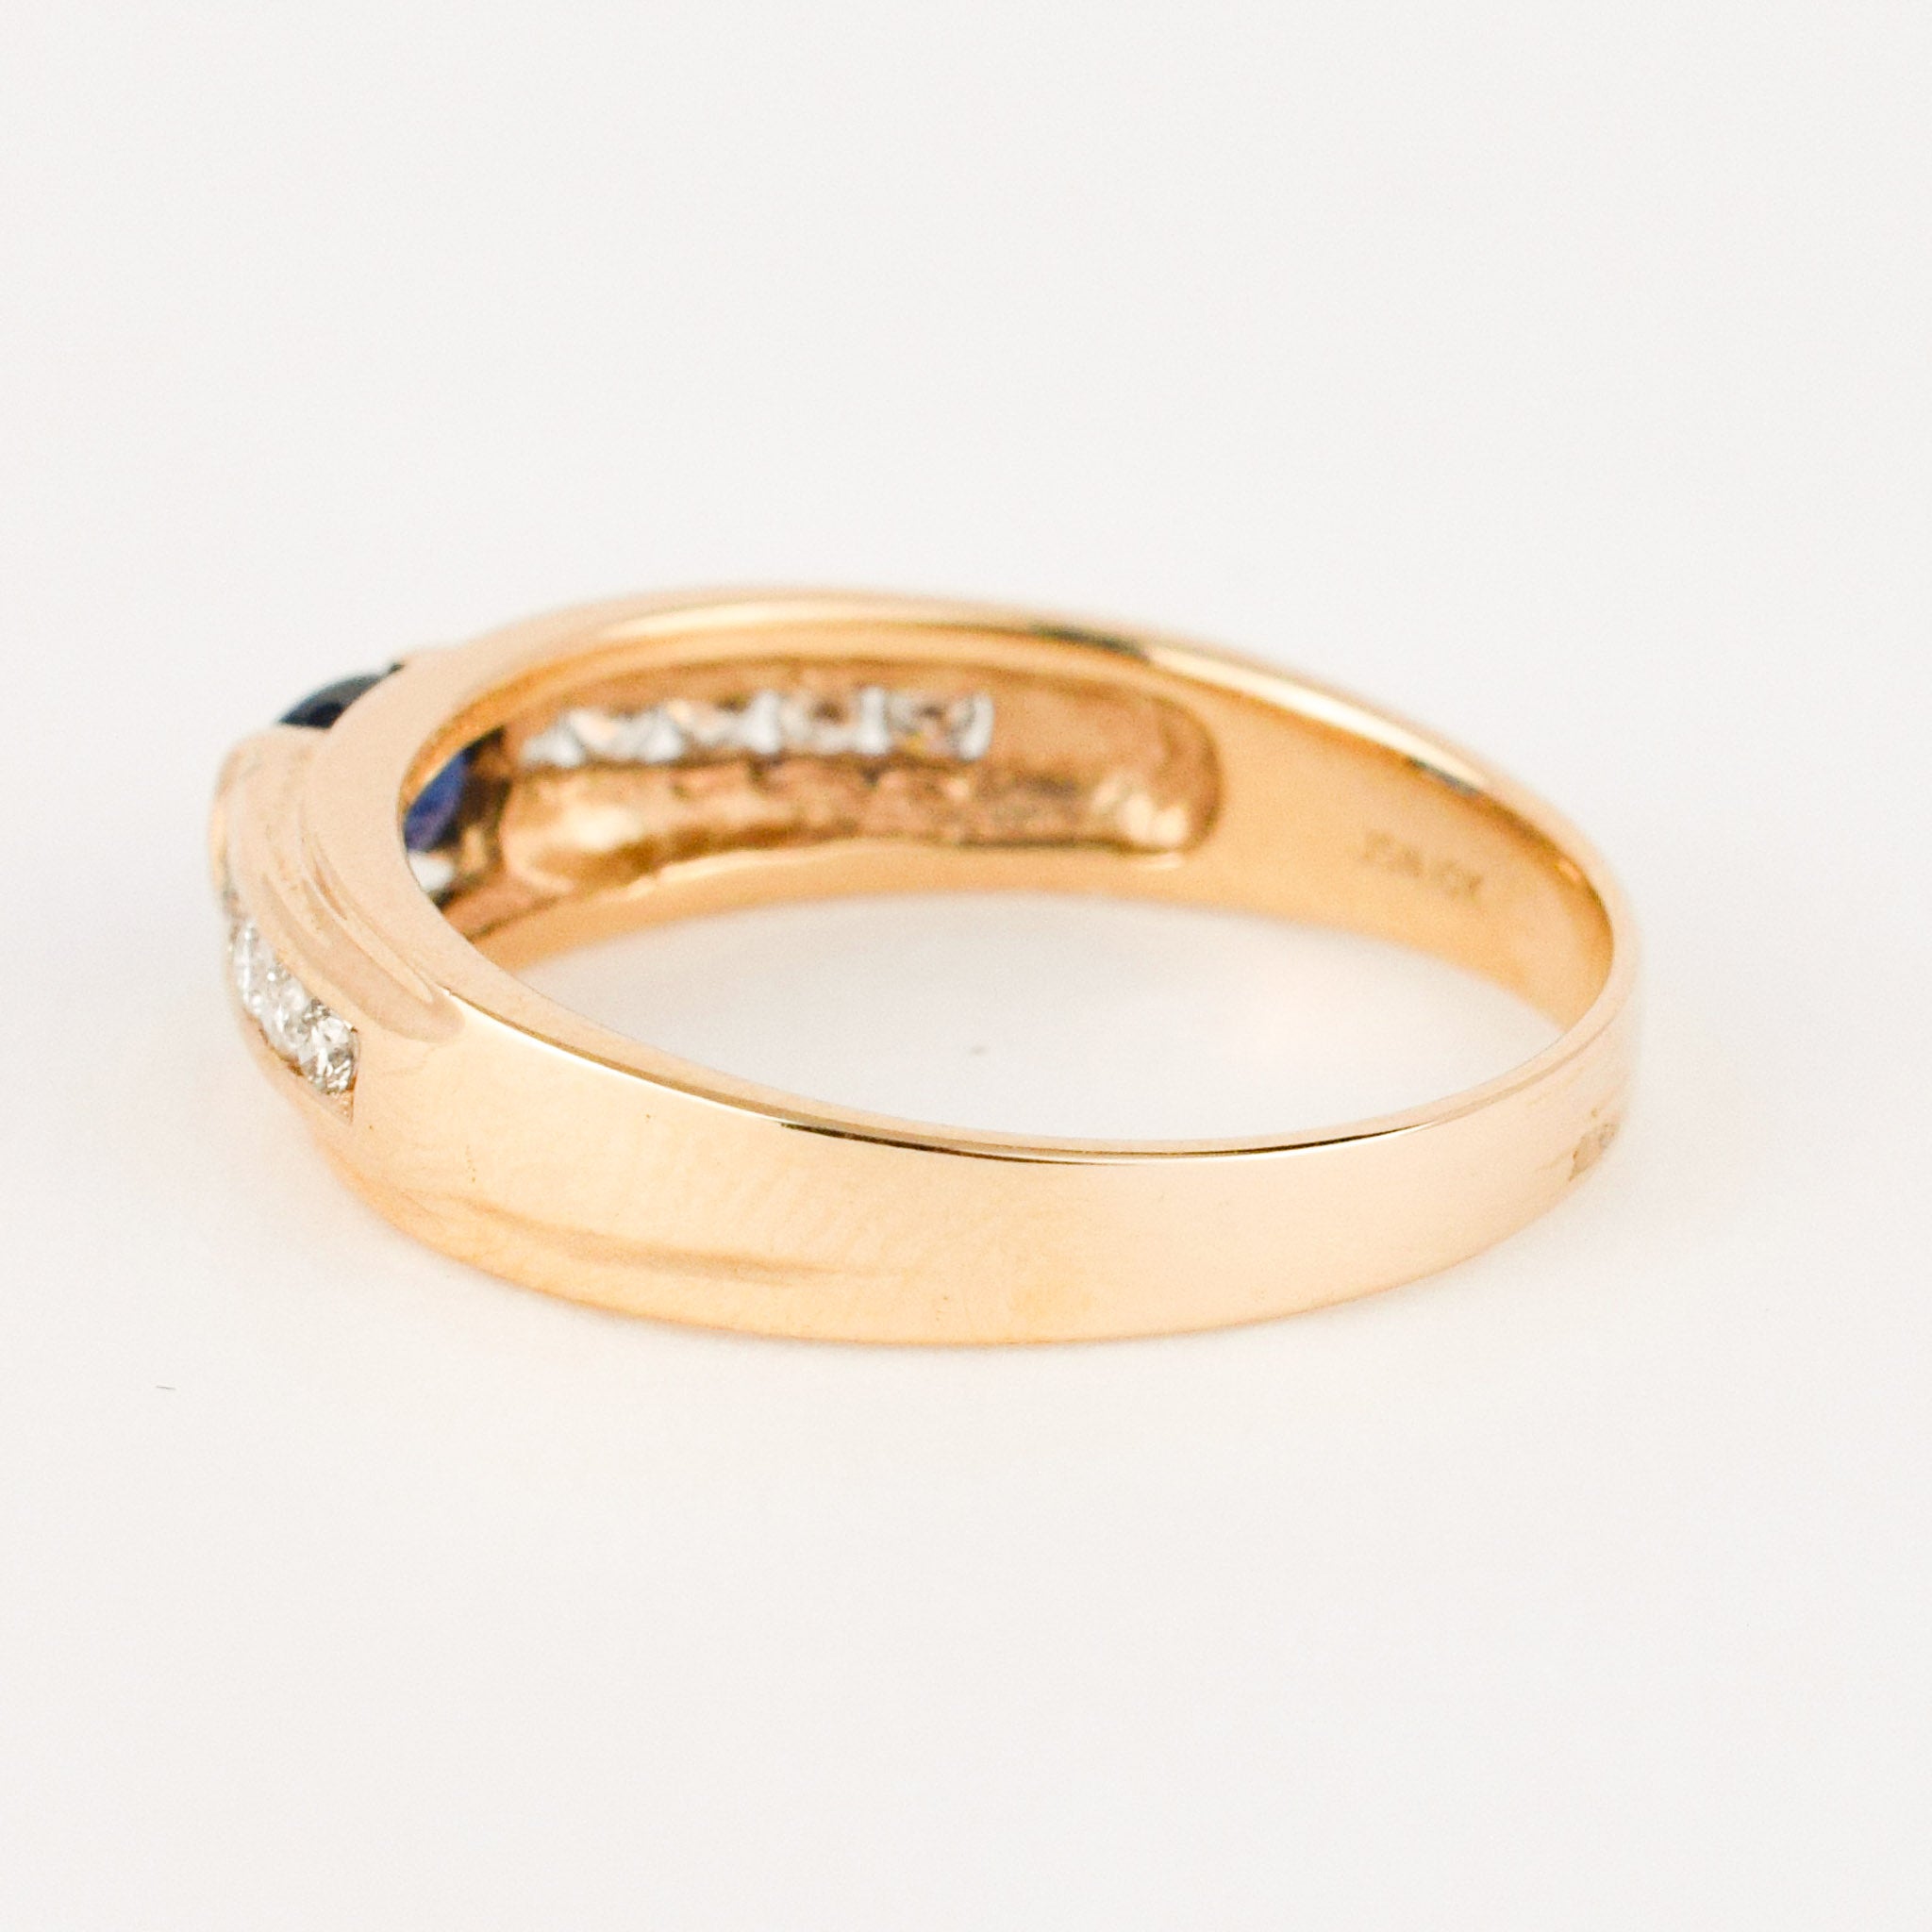 vintage gold sapphire and diamond band 